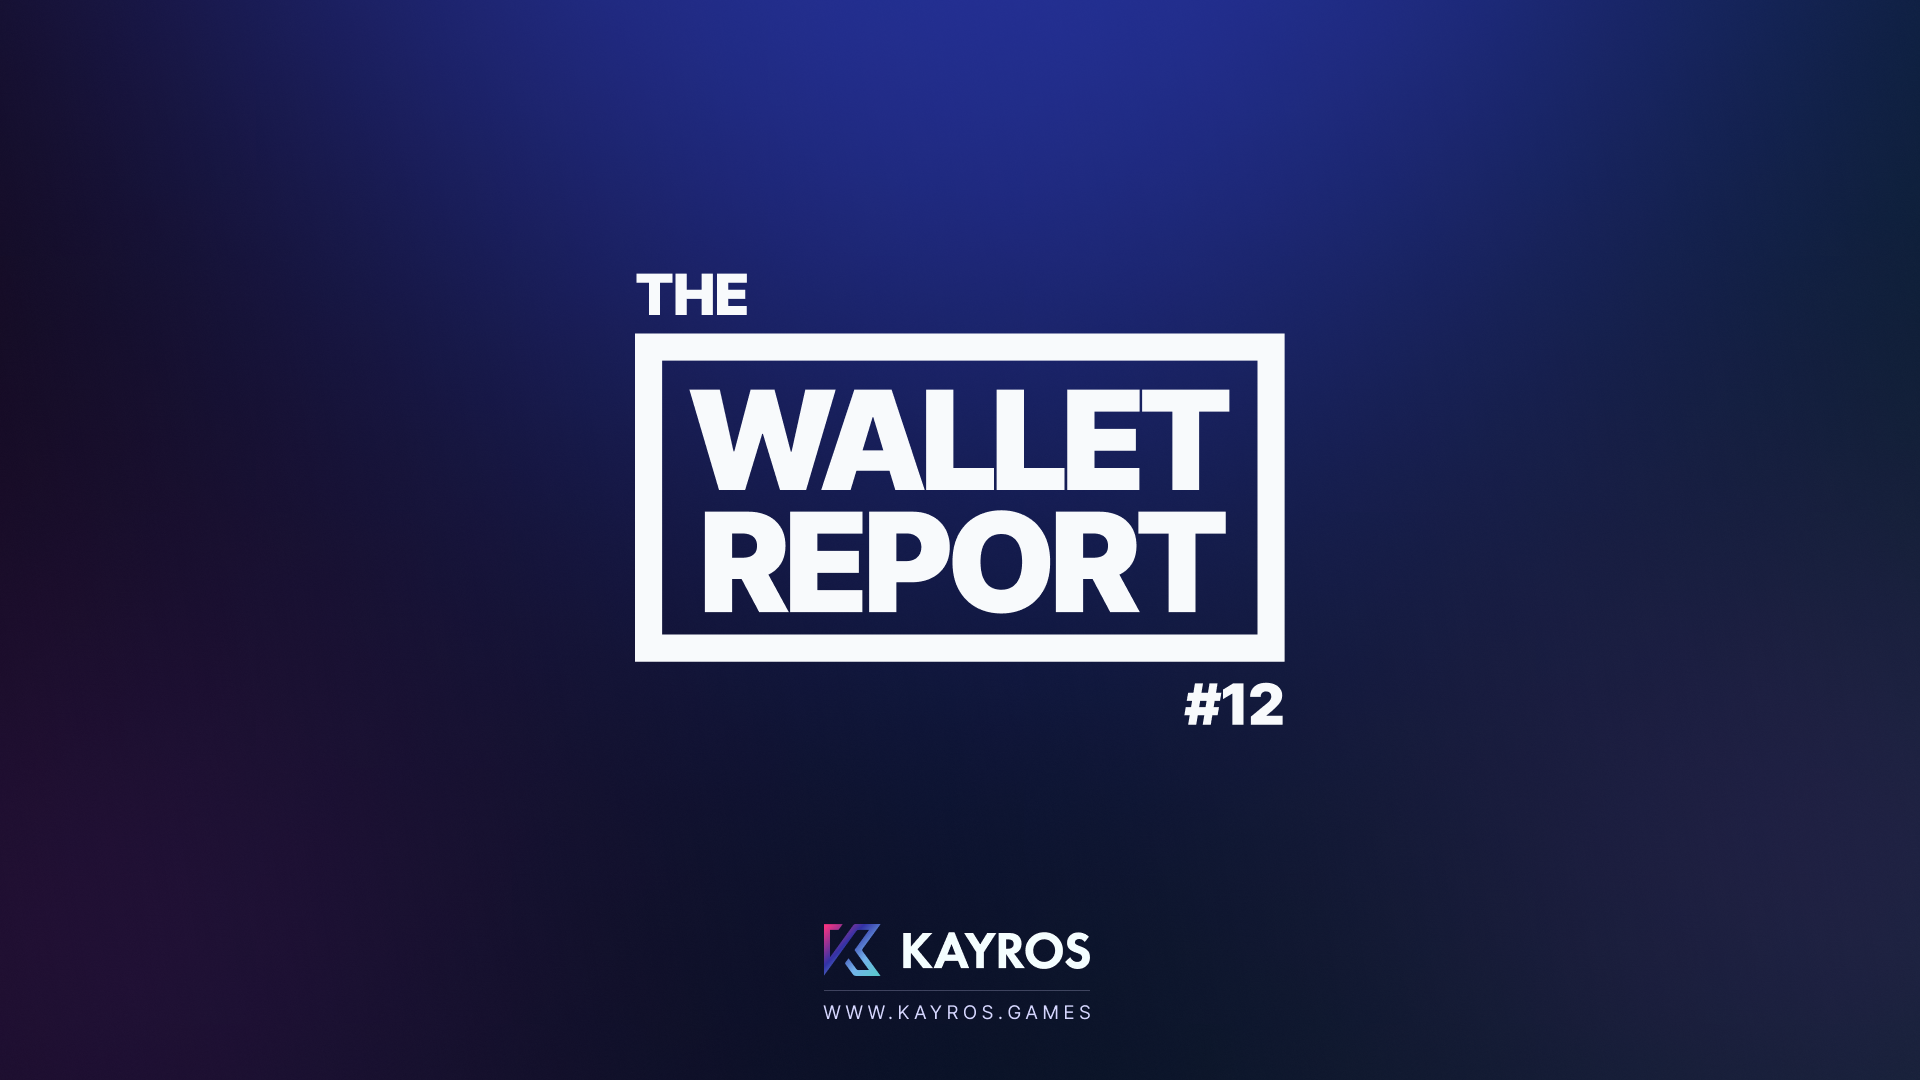 The Wallet Report #12